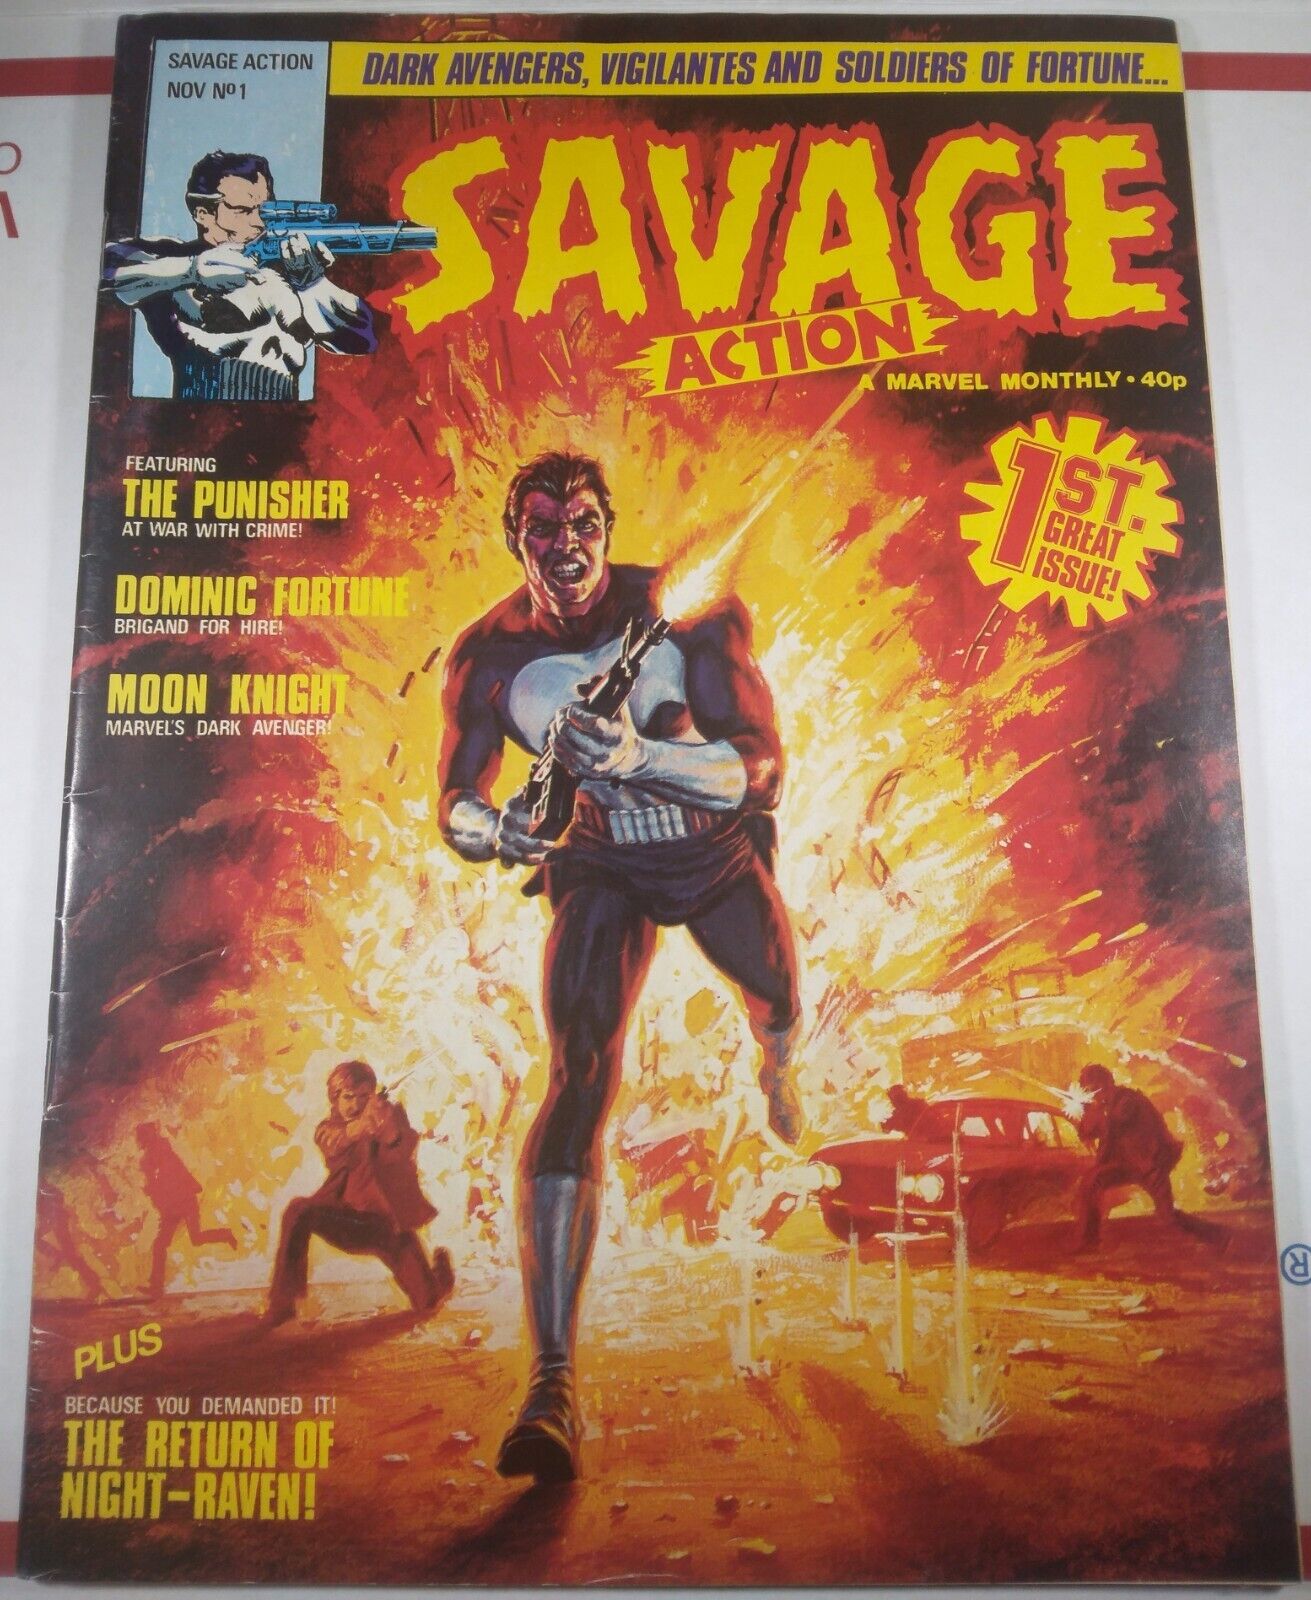 💀💥 SAVAGE ACTION #1 UK 1980 THE PUNISHER MARVEL PREVIEW 2 MOON KNIGHT HULK 15